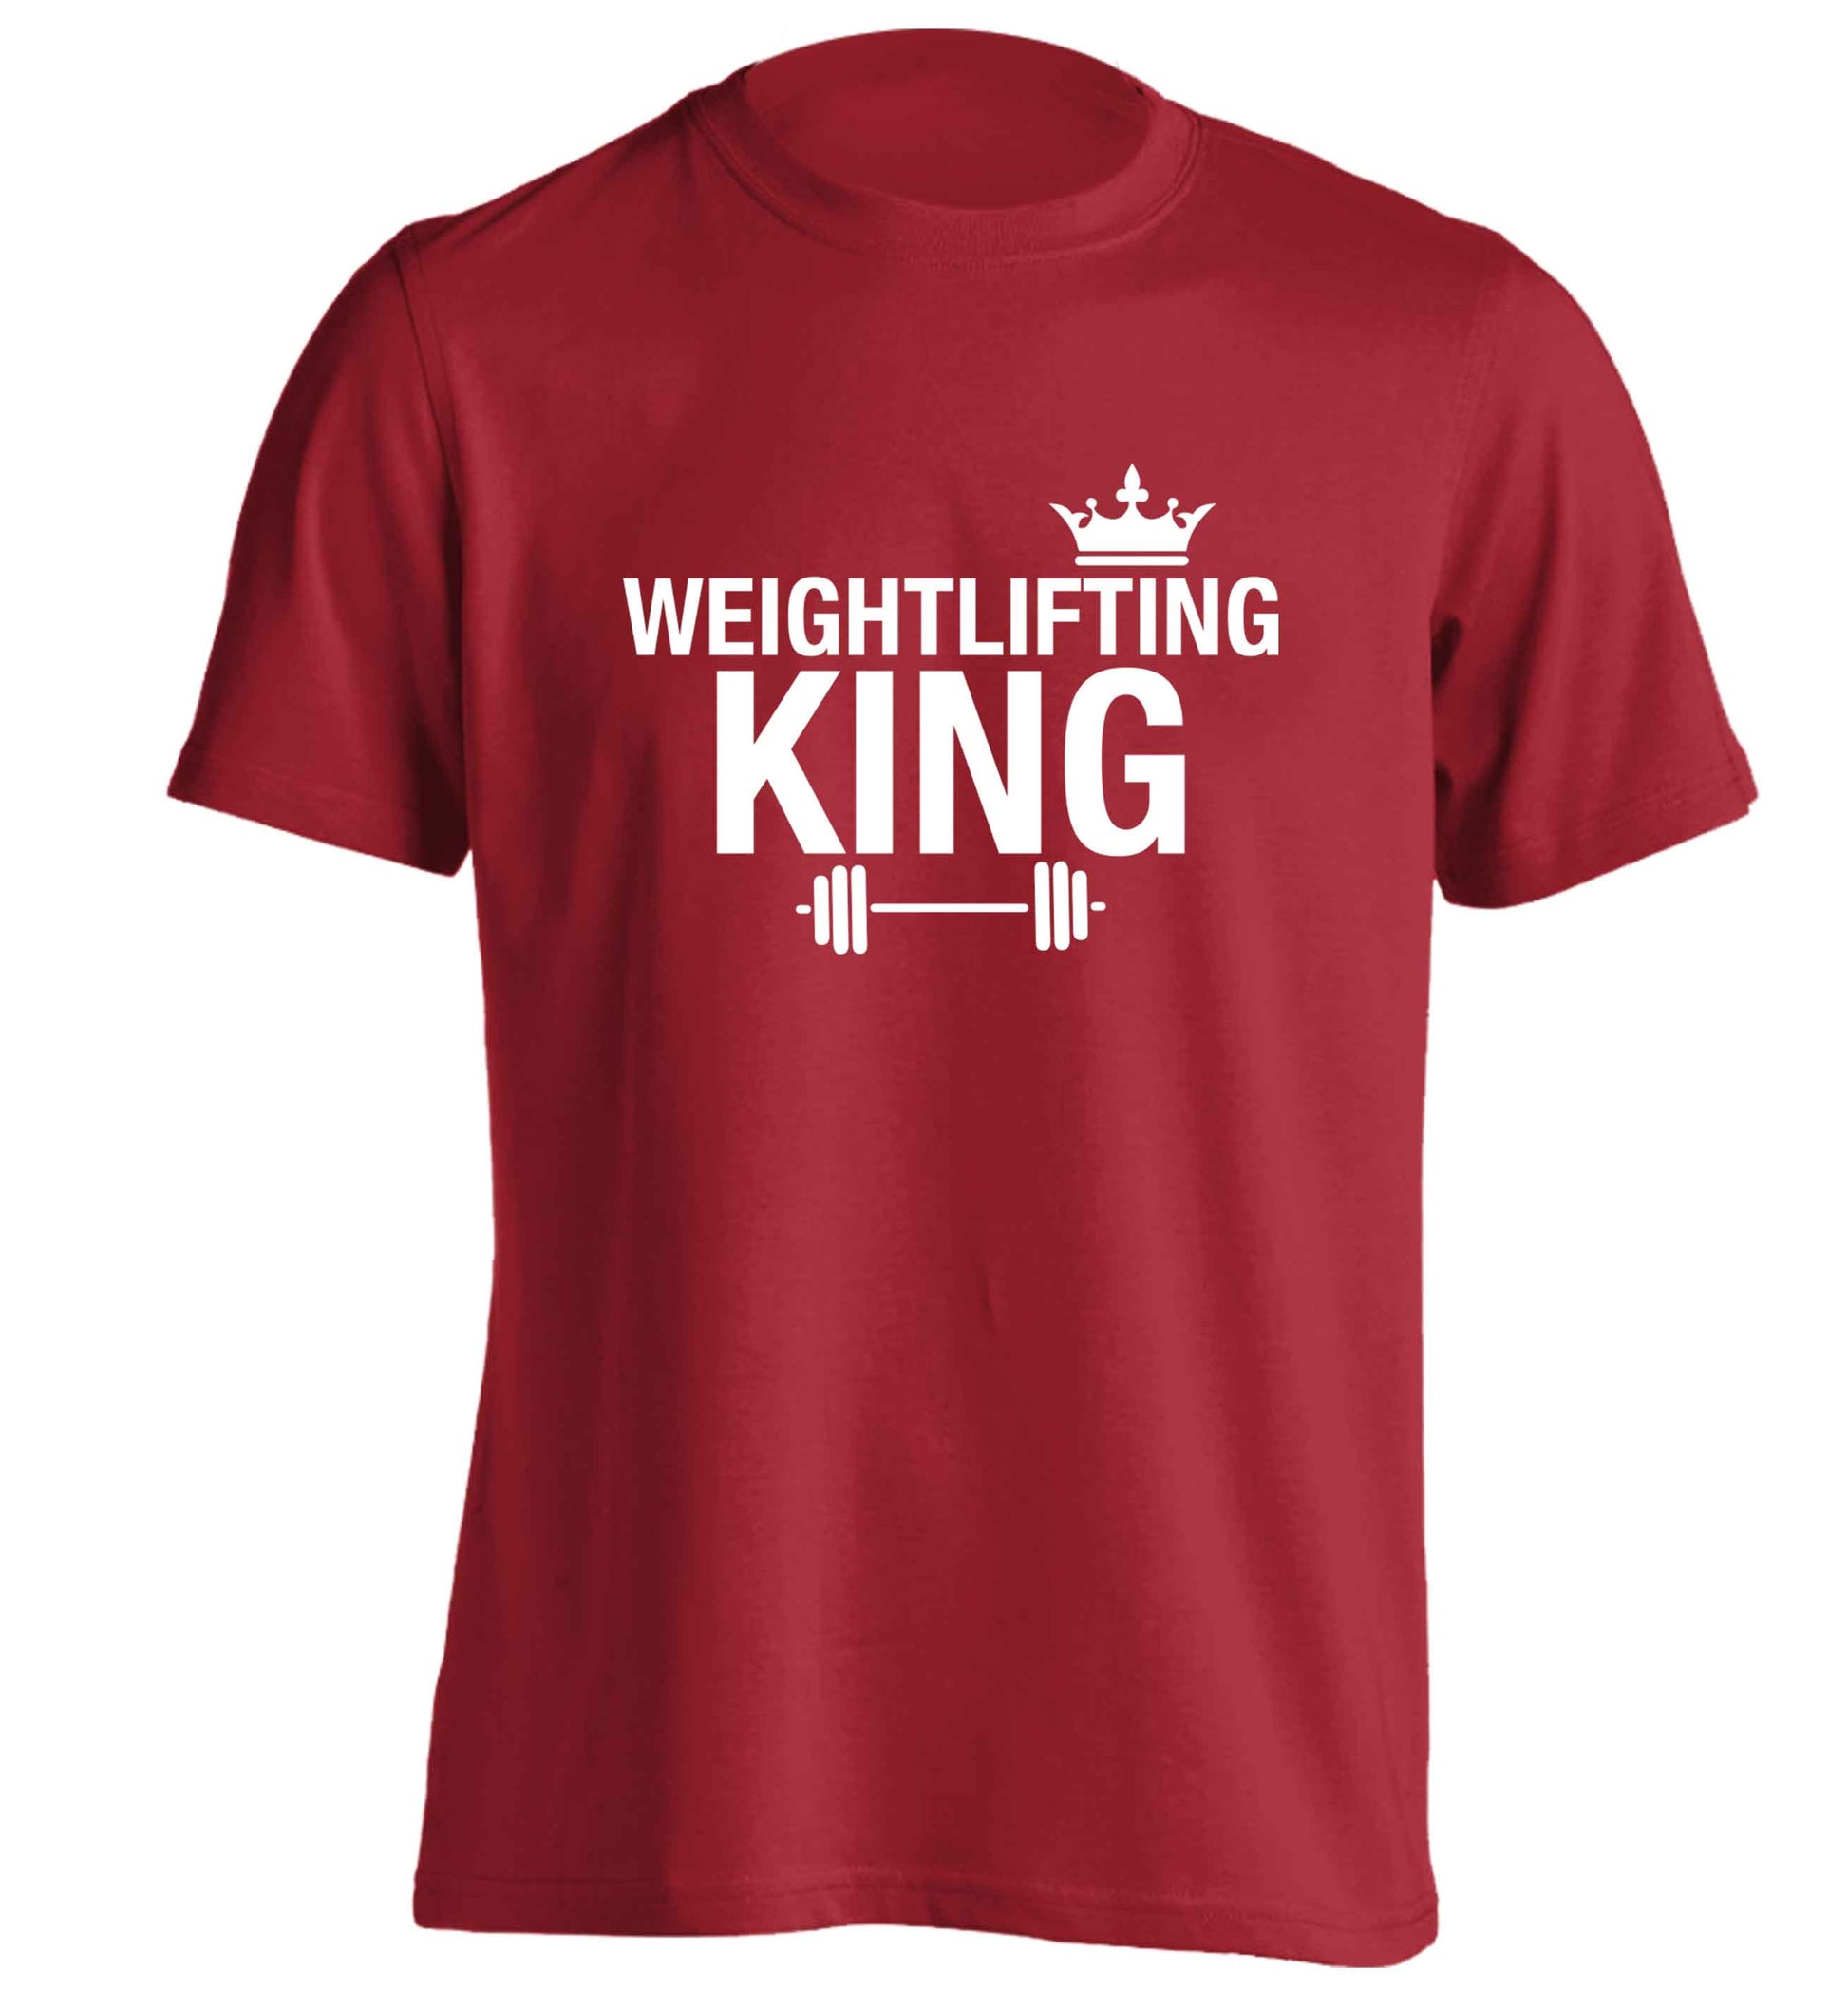 Weightlifting king adults unisex red Tshirt 2XL